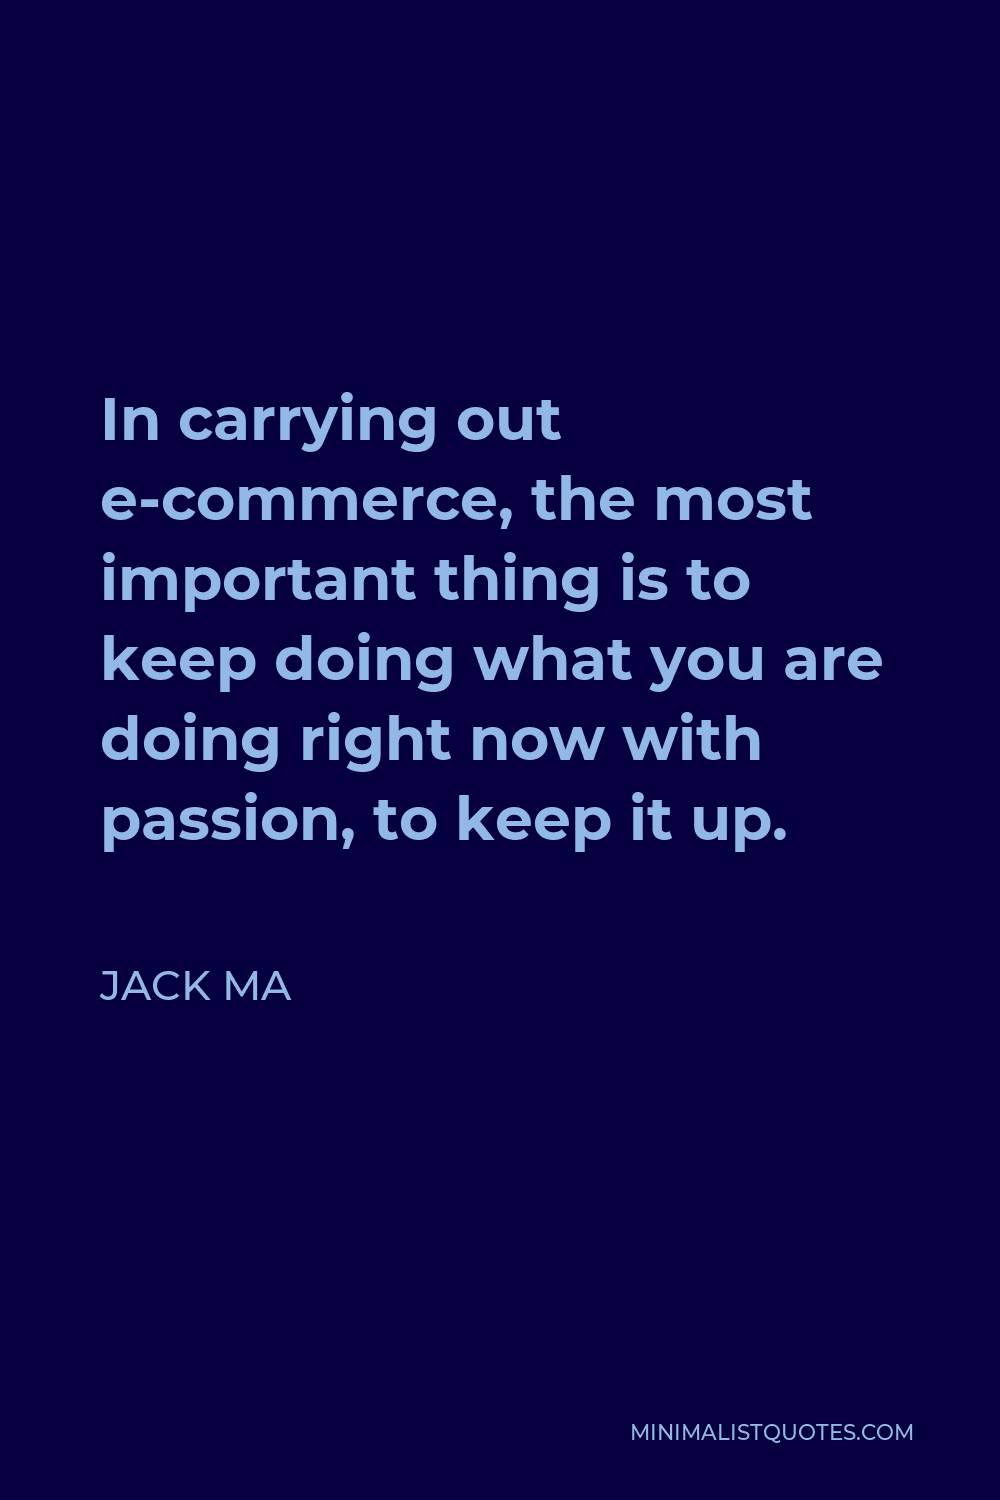 Jack Ma Quote - In carrying out e-commerce, the most important thing is to keep doing what you are doing right now with passion, to keep it up.